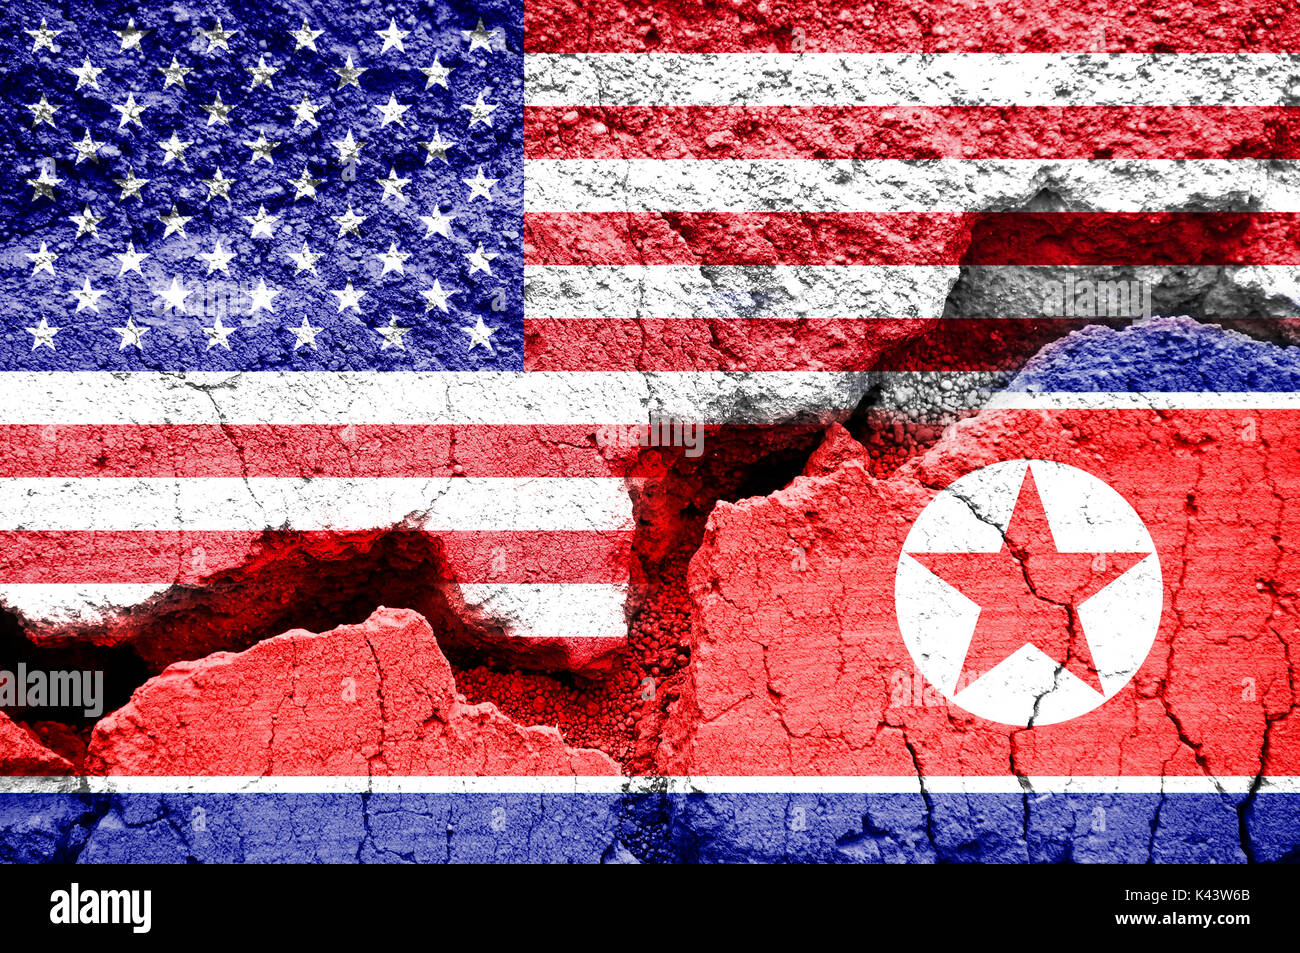 Flag of USA and North Korea on a cracked background. Concept of conflict between two nations, Washington and Pyongyang. Stock Photo